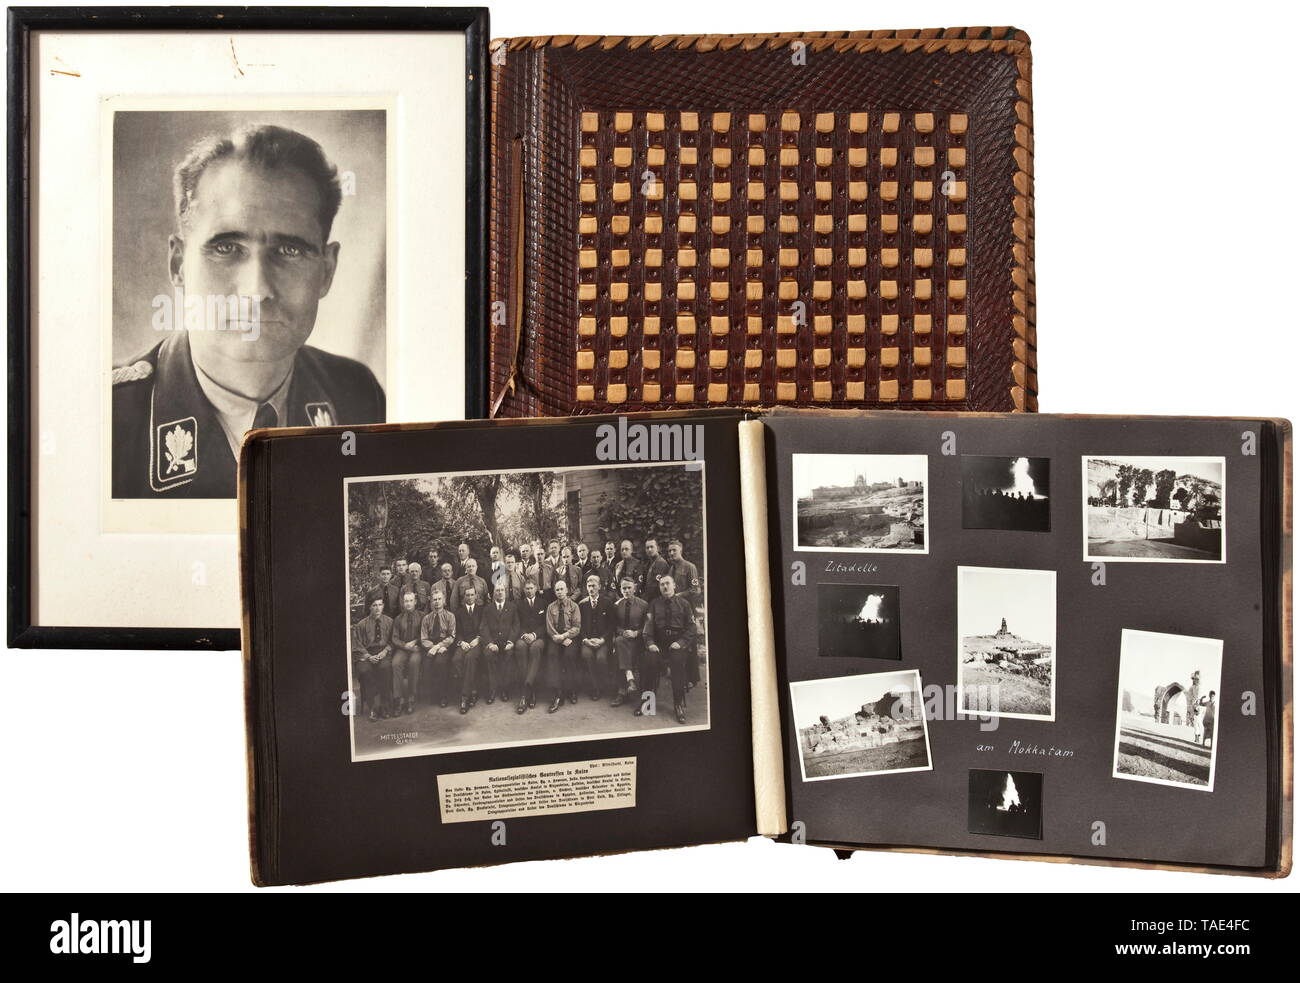 An estate of Rudolf Türke - member of NSDAP local group Cairo Two photo albums with 300 highly interesting images, including a mountain ascent, images of the national group leader (with a dedication to Türke), National Day of Mourning in Cairo, reception for the officers of the 'Karlsruhe', a Nile boat with swastika, German Day in Egypt, parade of flags, Gau meeting in Cairo, receptions, land and people. Among these is a portrait of Rudolf Heß with handwritten dedication (tr.) 'to my old comrade-in-arms Christmas 1939', and a further framed portrait of Heß. Highly interesti, Editorial-Use-Only Stock Photo